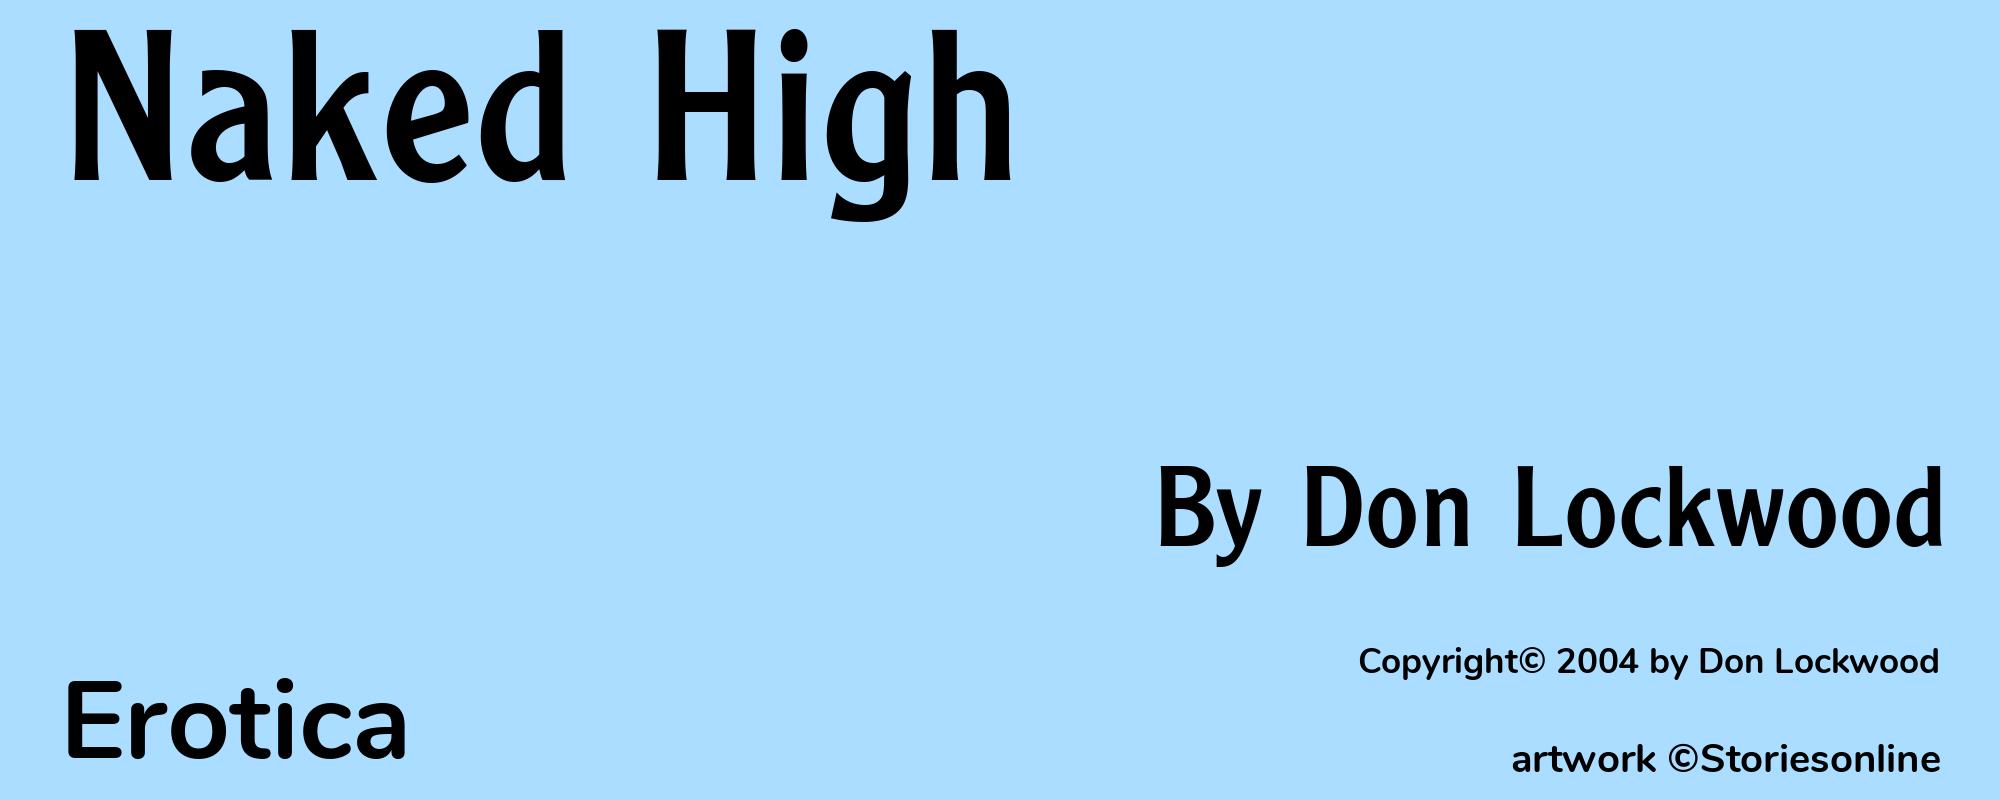 Naked High - Cover